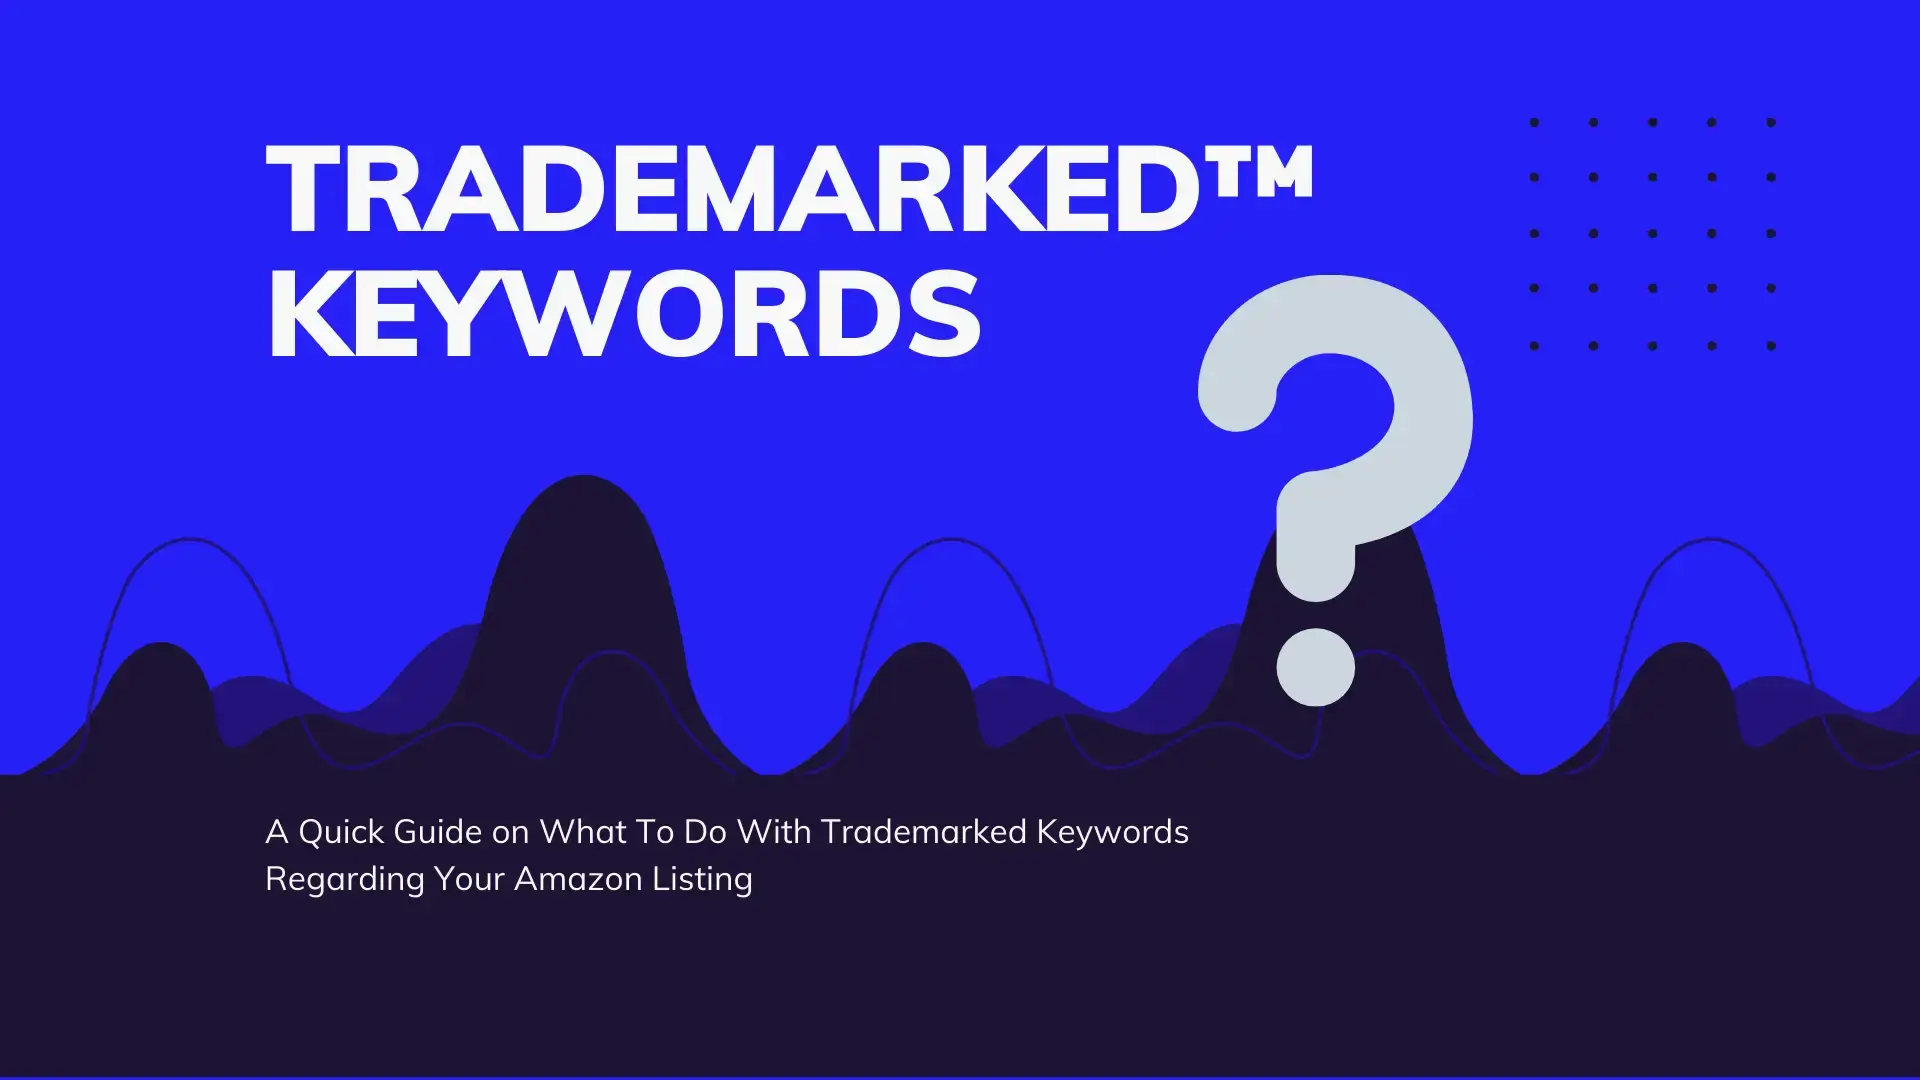 a guide to trademarked keywords on amazon